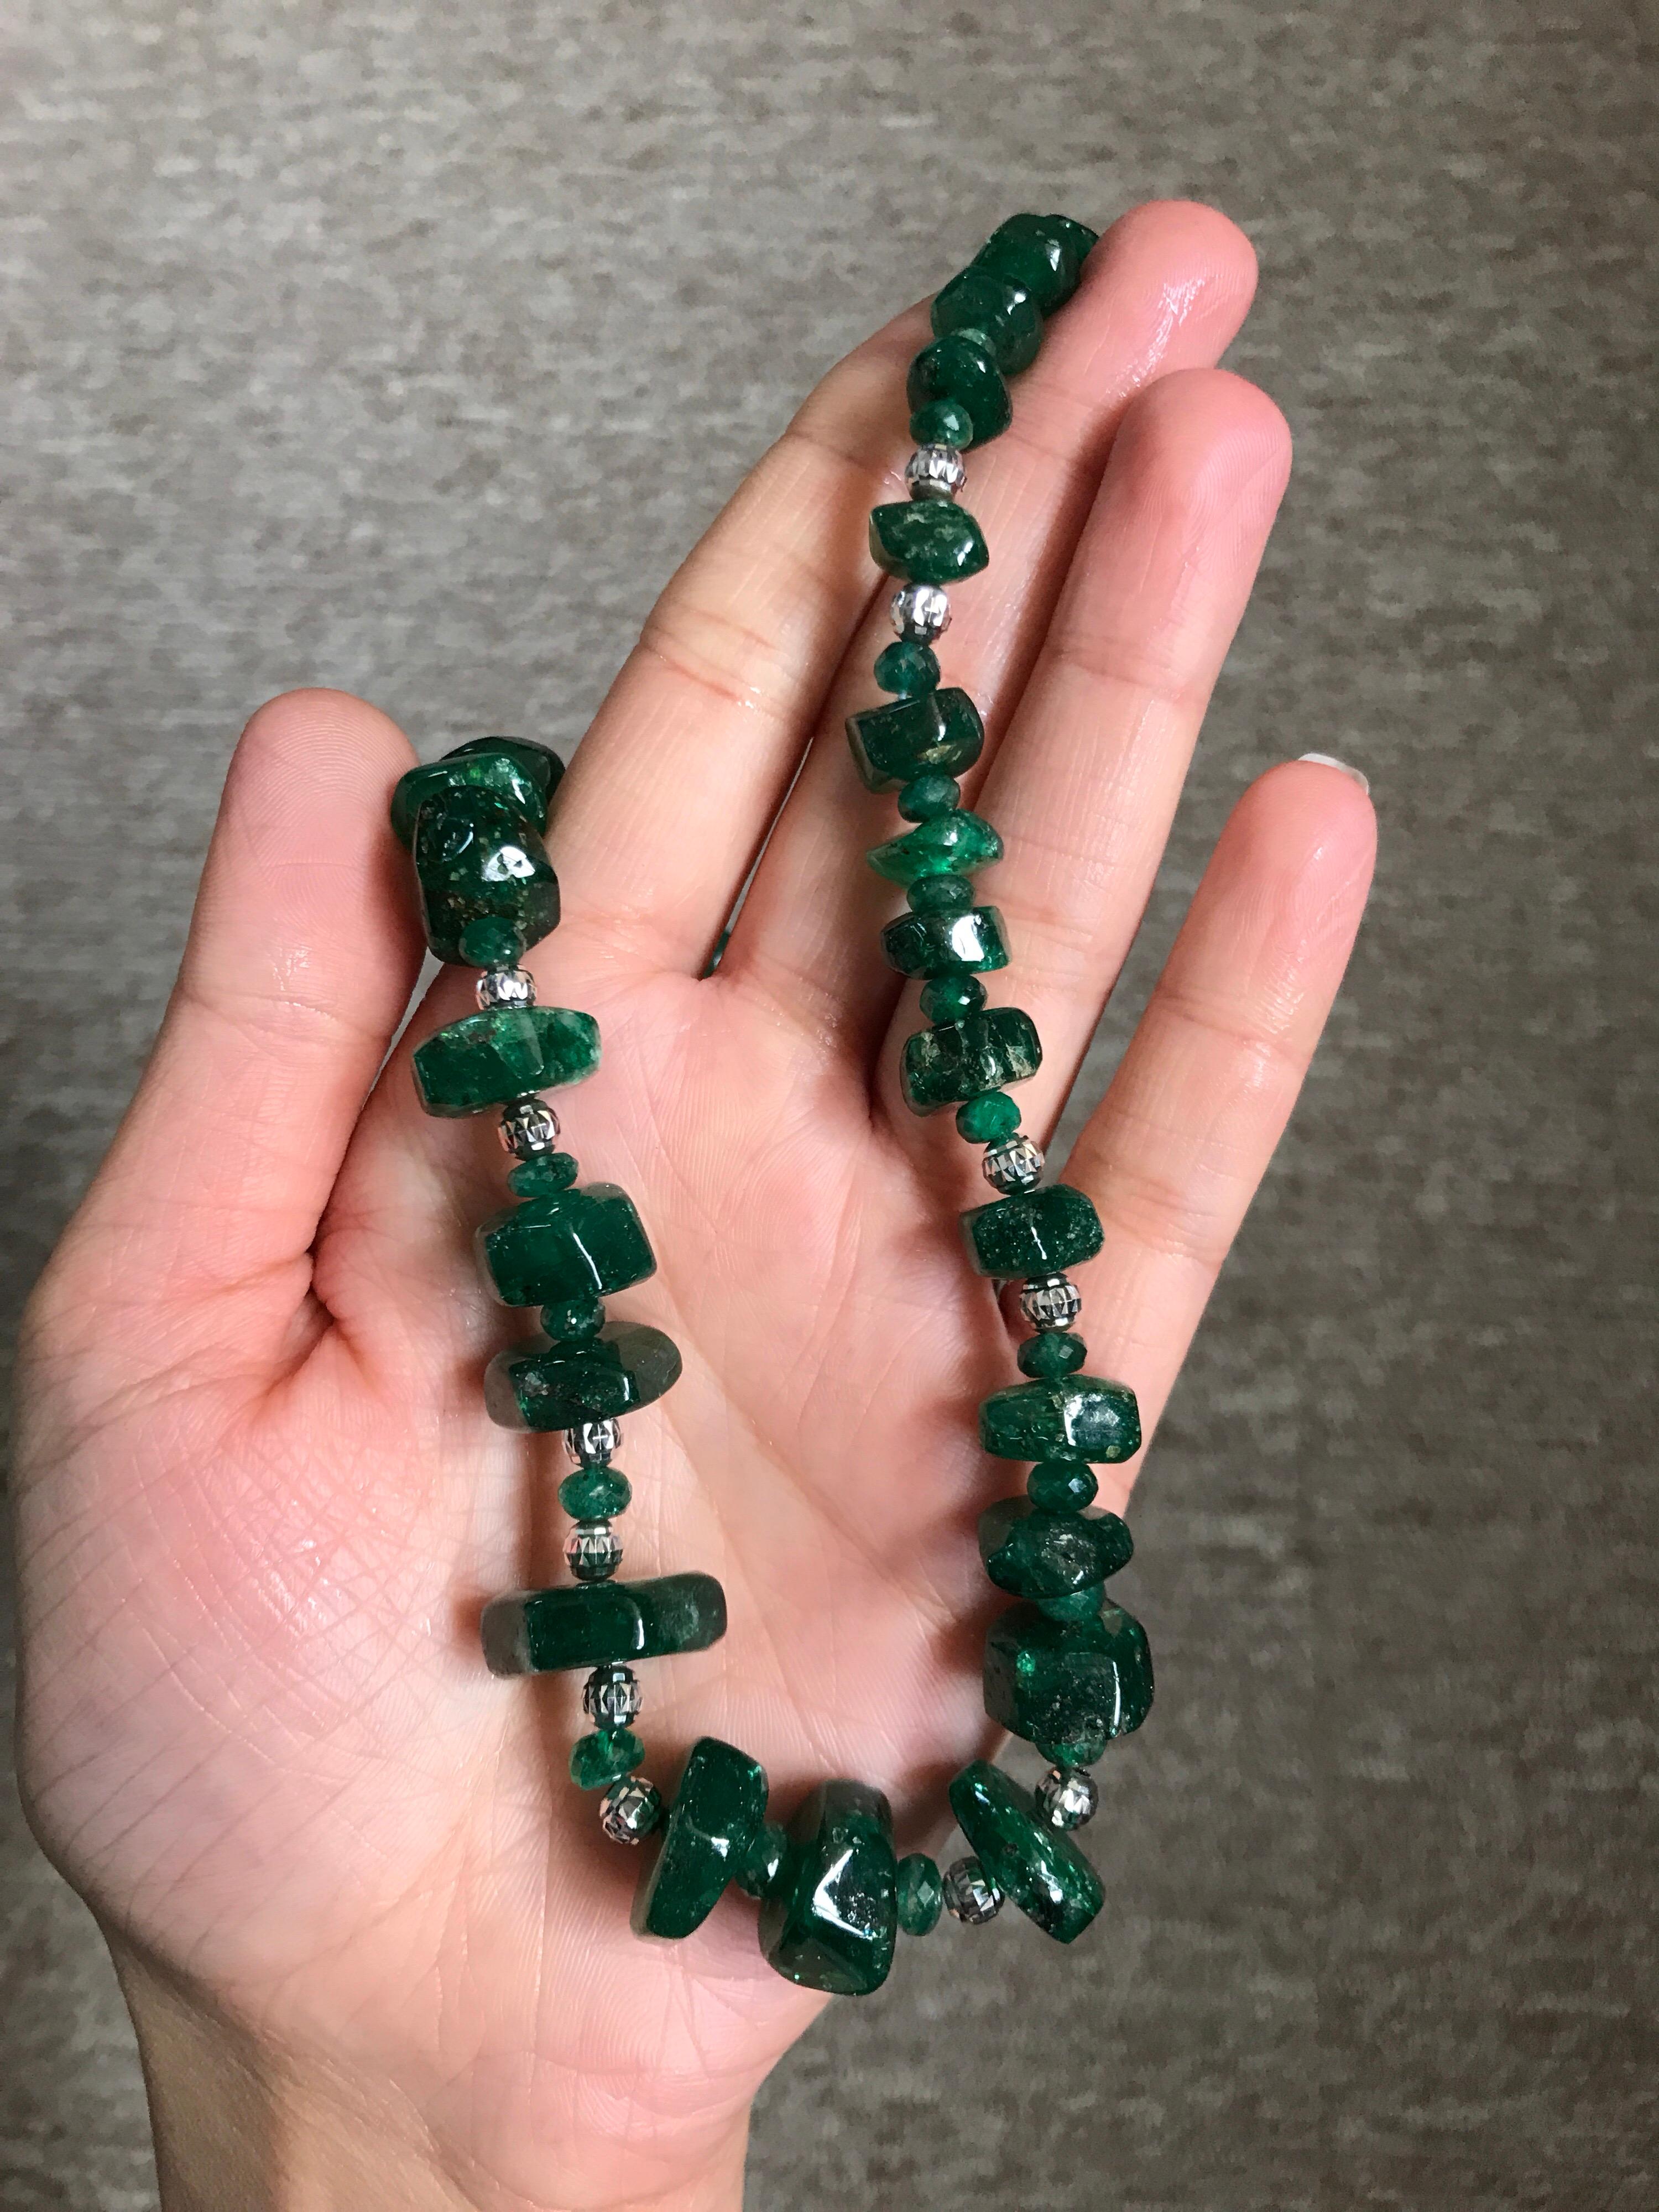 A very unique art-deco looking 308 carat, graduating size Emerald tumble beads necklace with 18K gold beads dividers and clasp. This necklace is one of a kind as it's rare to find this shaped emerald beads of this size which can be worn casually and